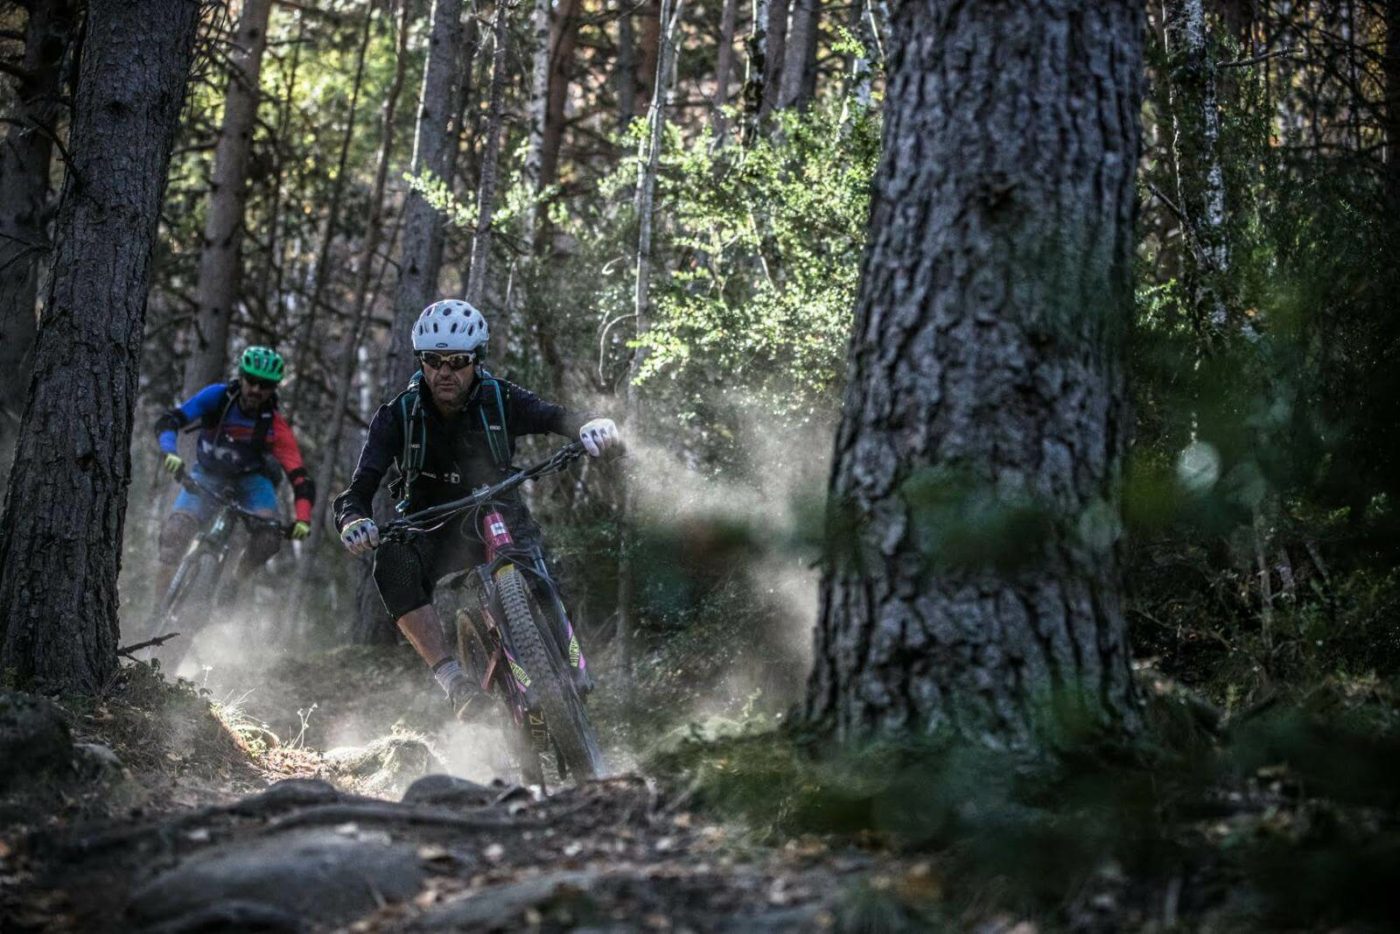 Two mountain bike riders riding through an Alpine forest trail.